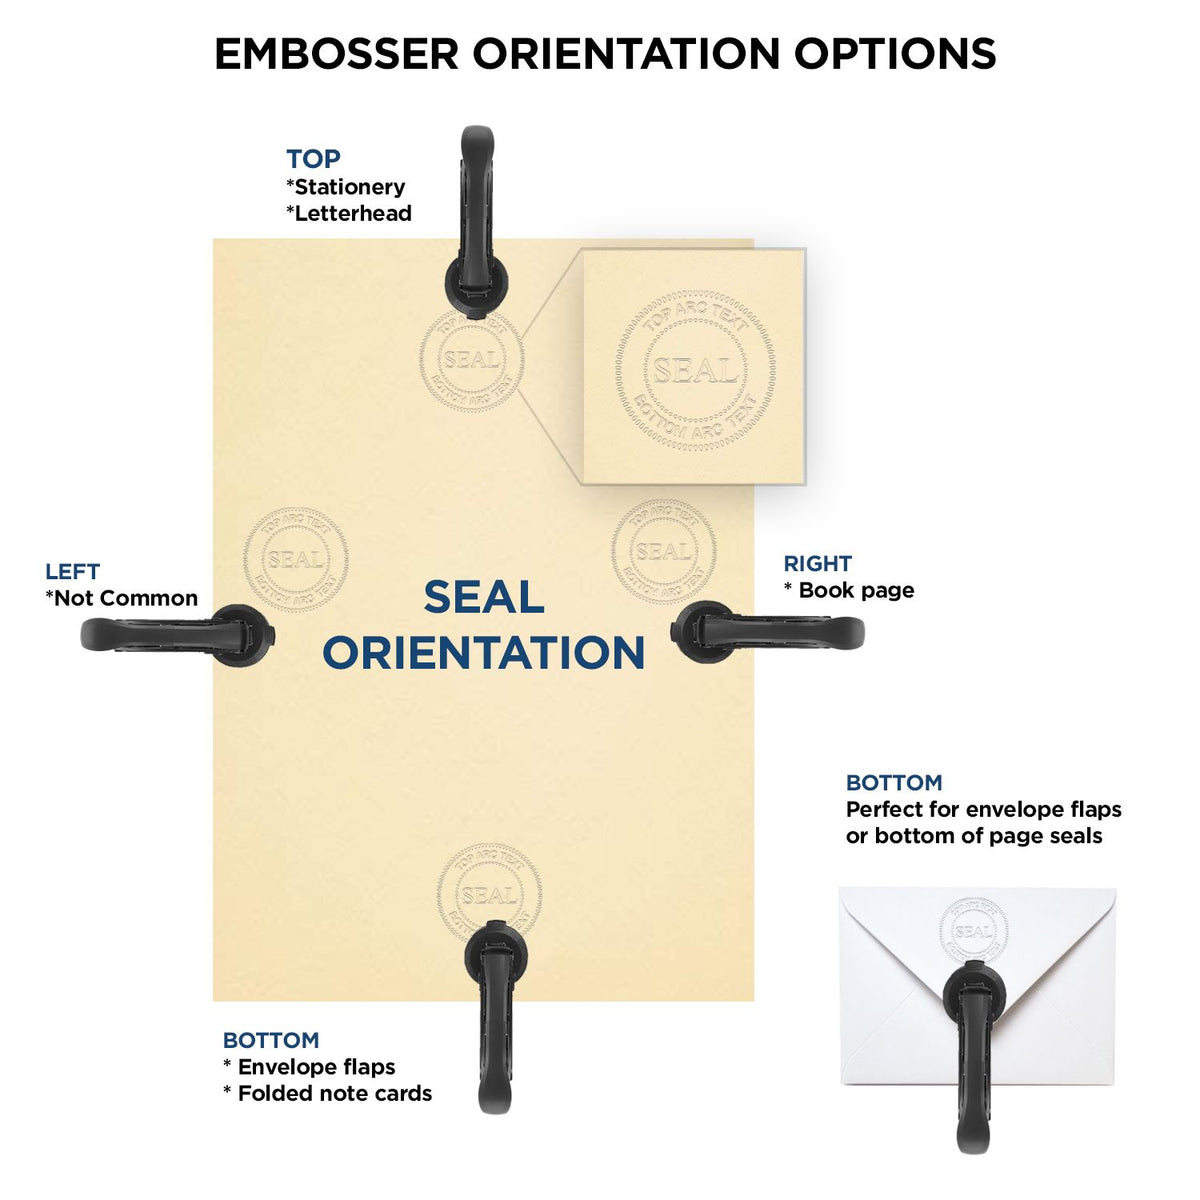 An infographic for the Handheld Maine Land Surveyor Seal showing embosser orientation, this is showing examples of a top, bottom, right and left insert.